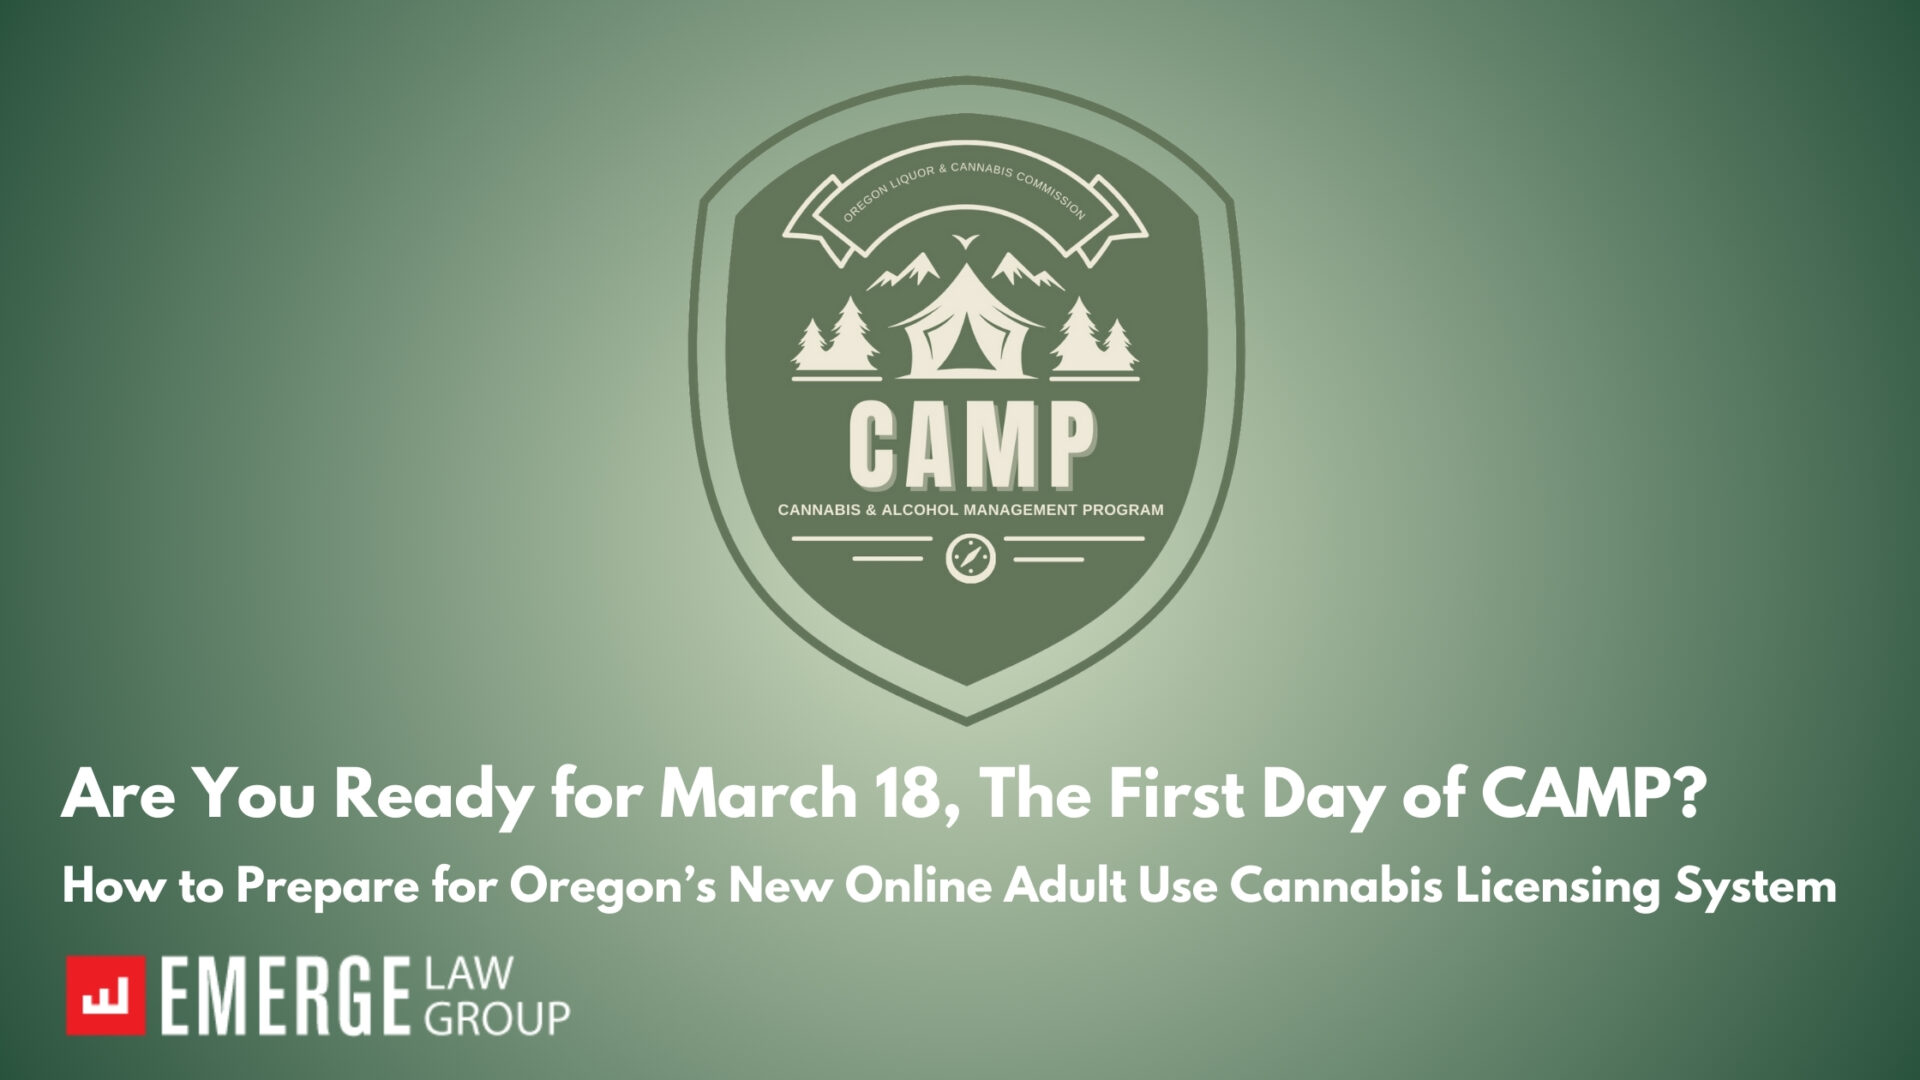 UPDATE/CORRECTIONS: Are You Ready for March 18, The First Day of CAMP? How to Prepare for Oregon’s New Online Adult Use Cannabis Licensing System